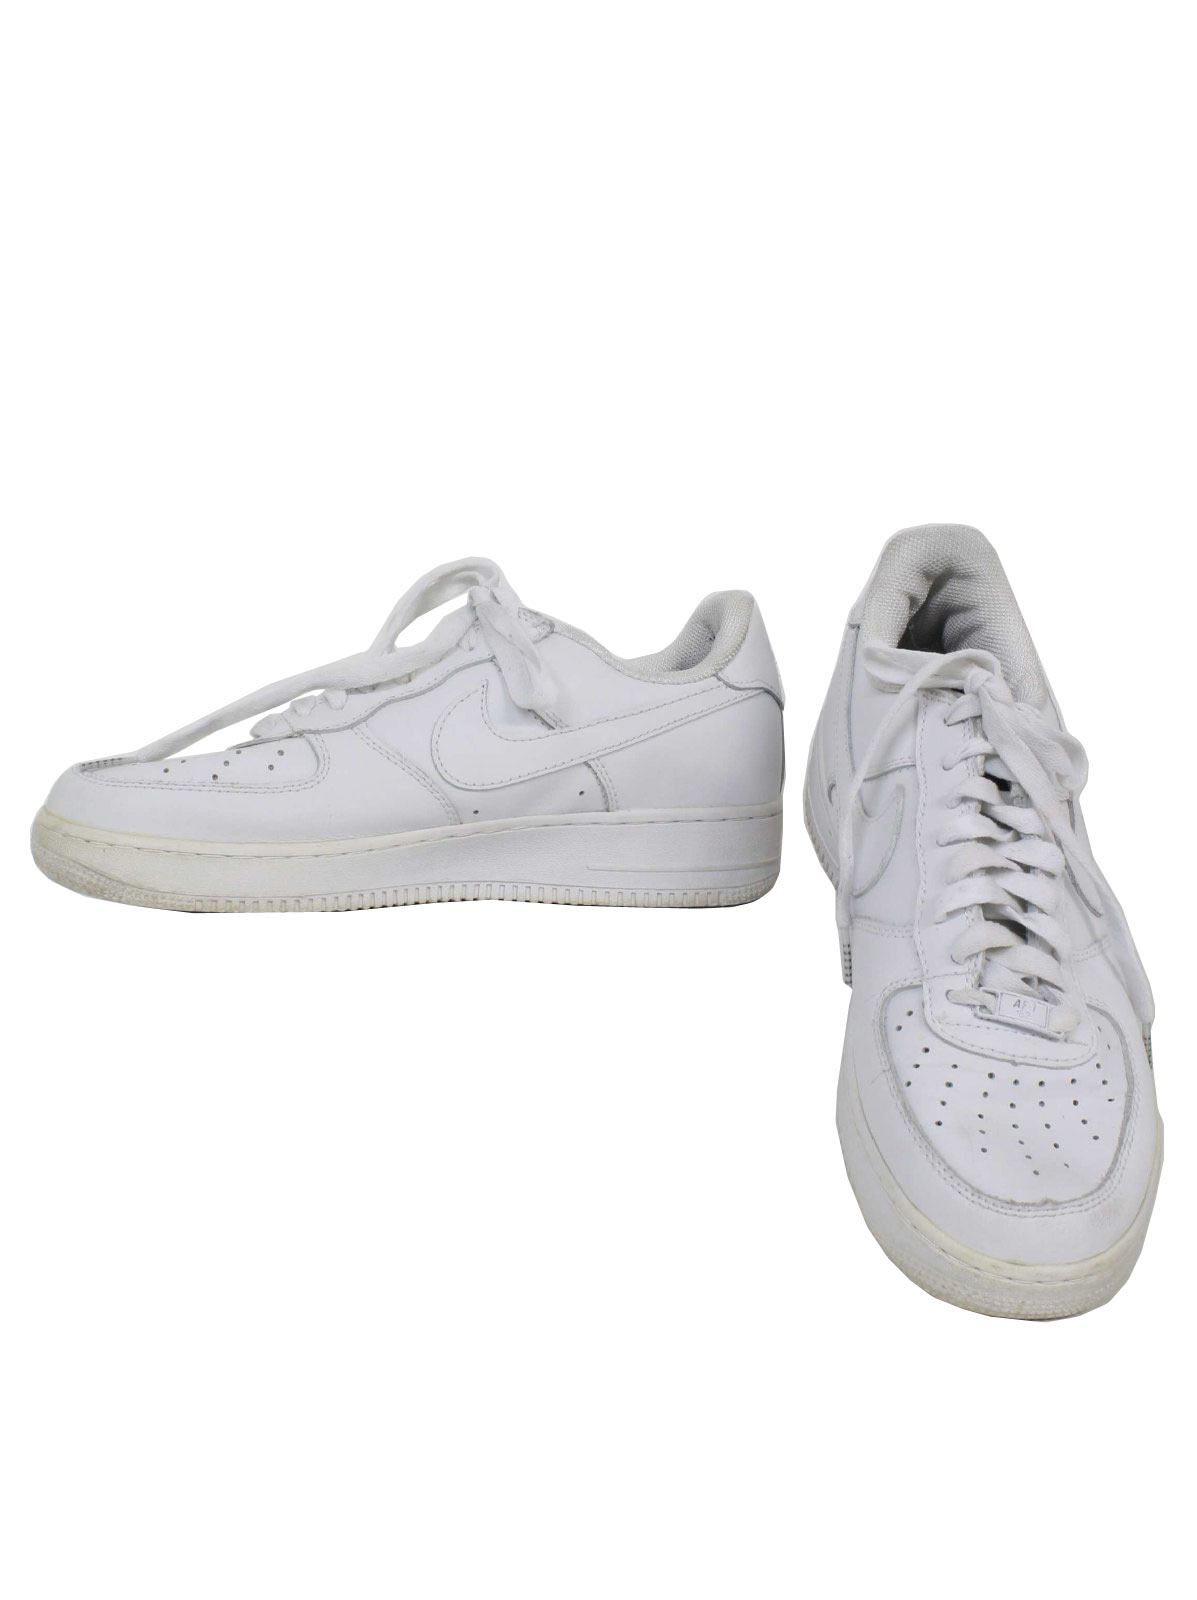 Retro 1990's Shoes (Nike Air Force 1) : 90s -Nike Air Force 1- Mens ...